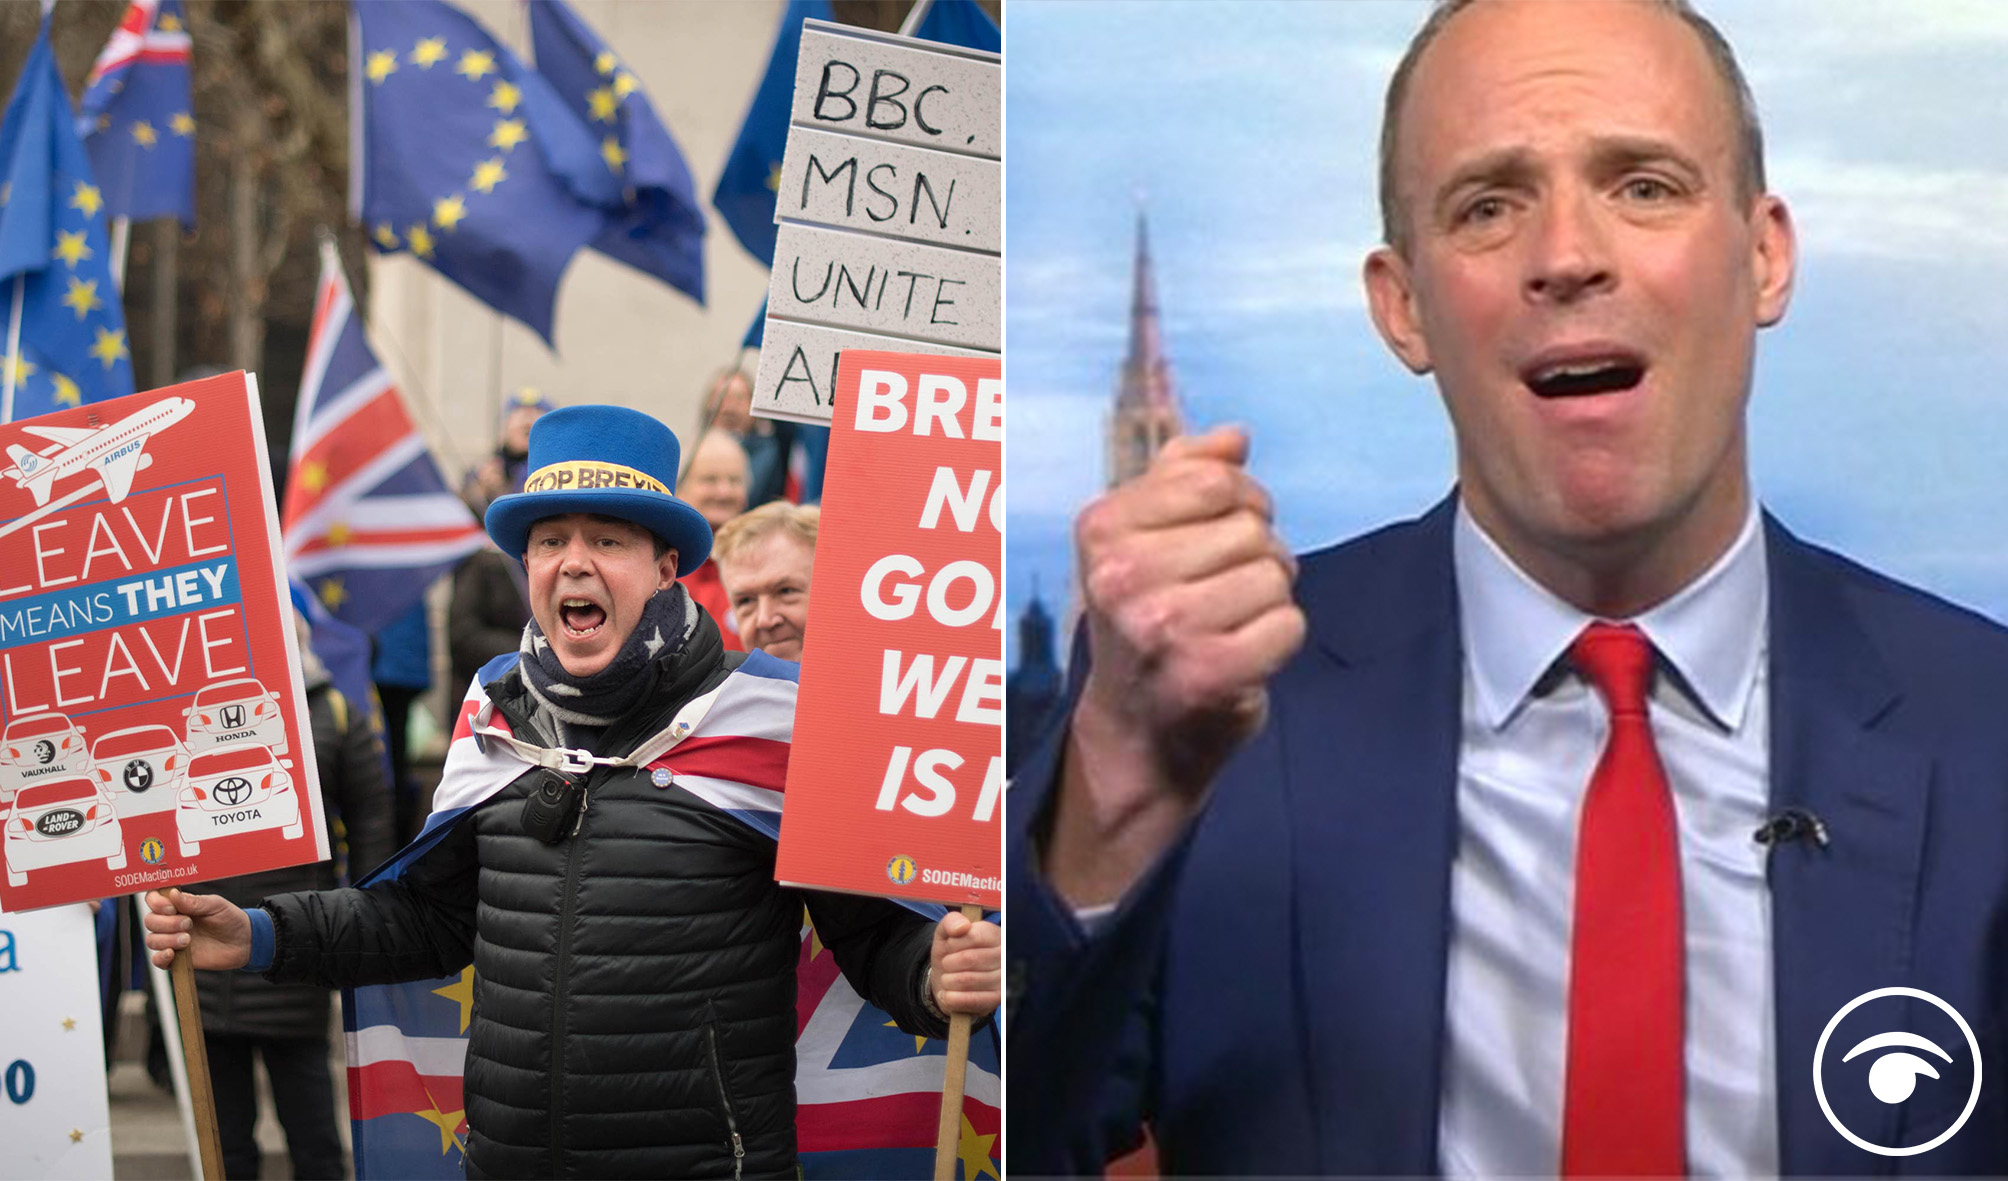 Watch: Steve Bray had a busy morning as he is accused of ‘libel’ by Raab